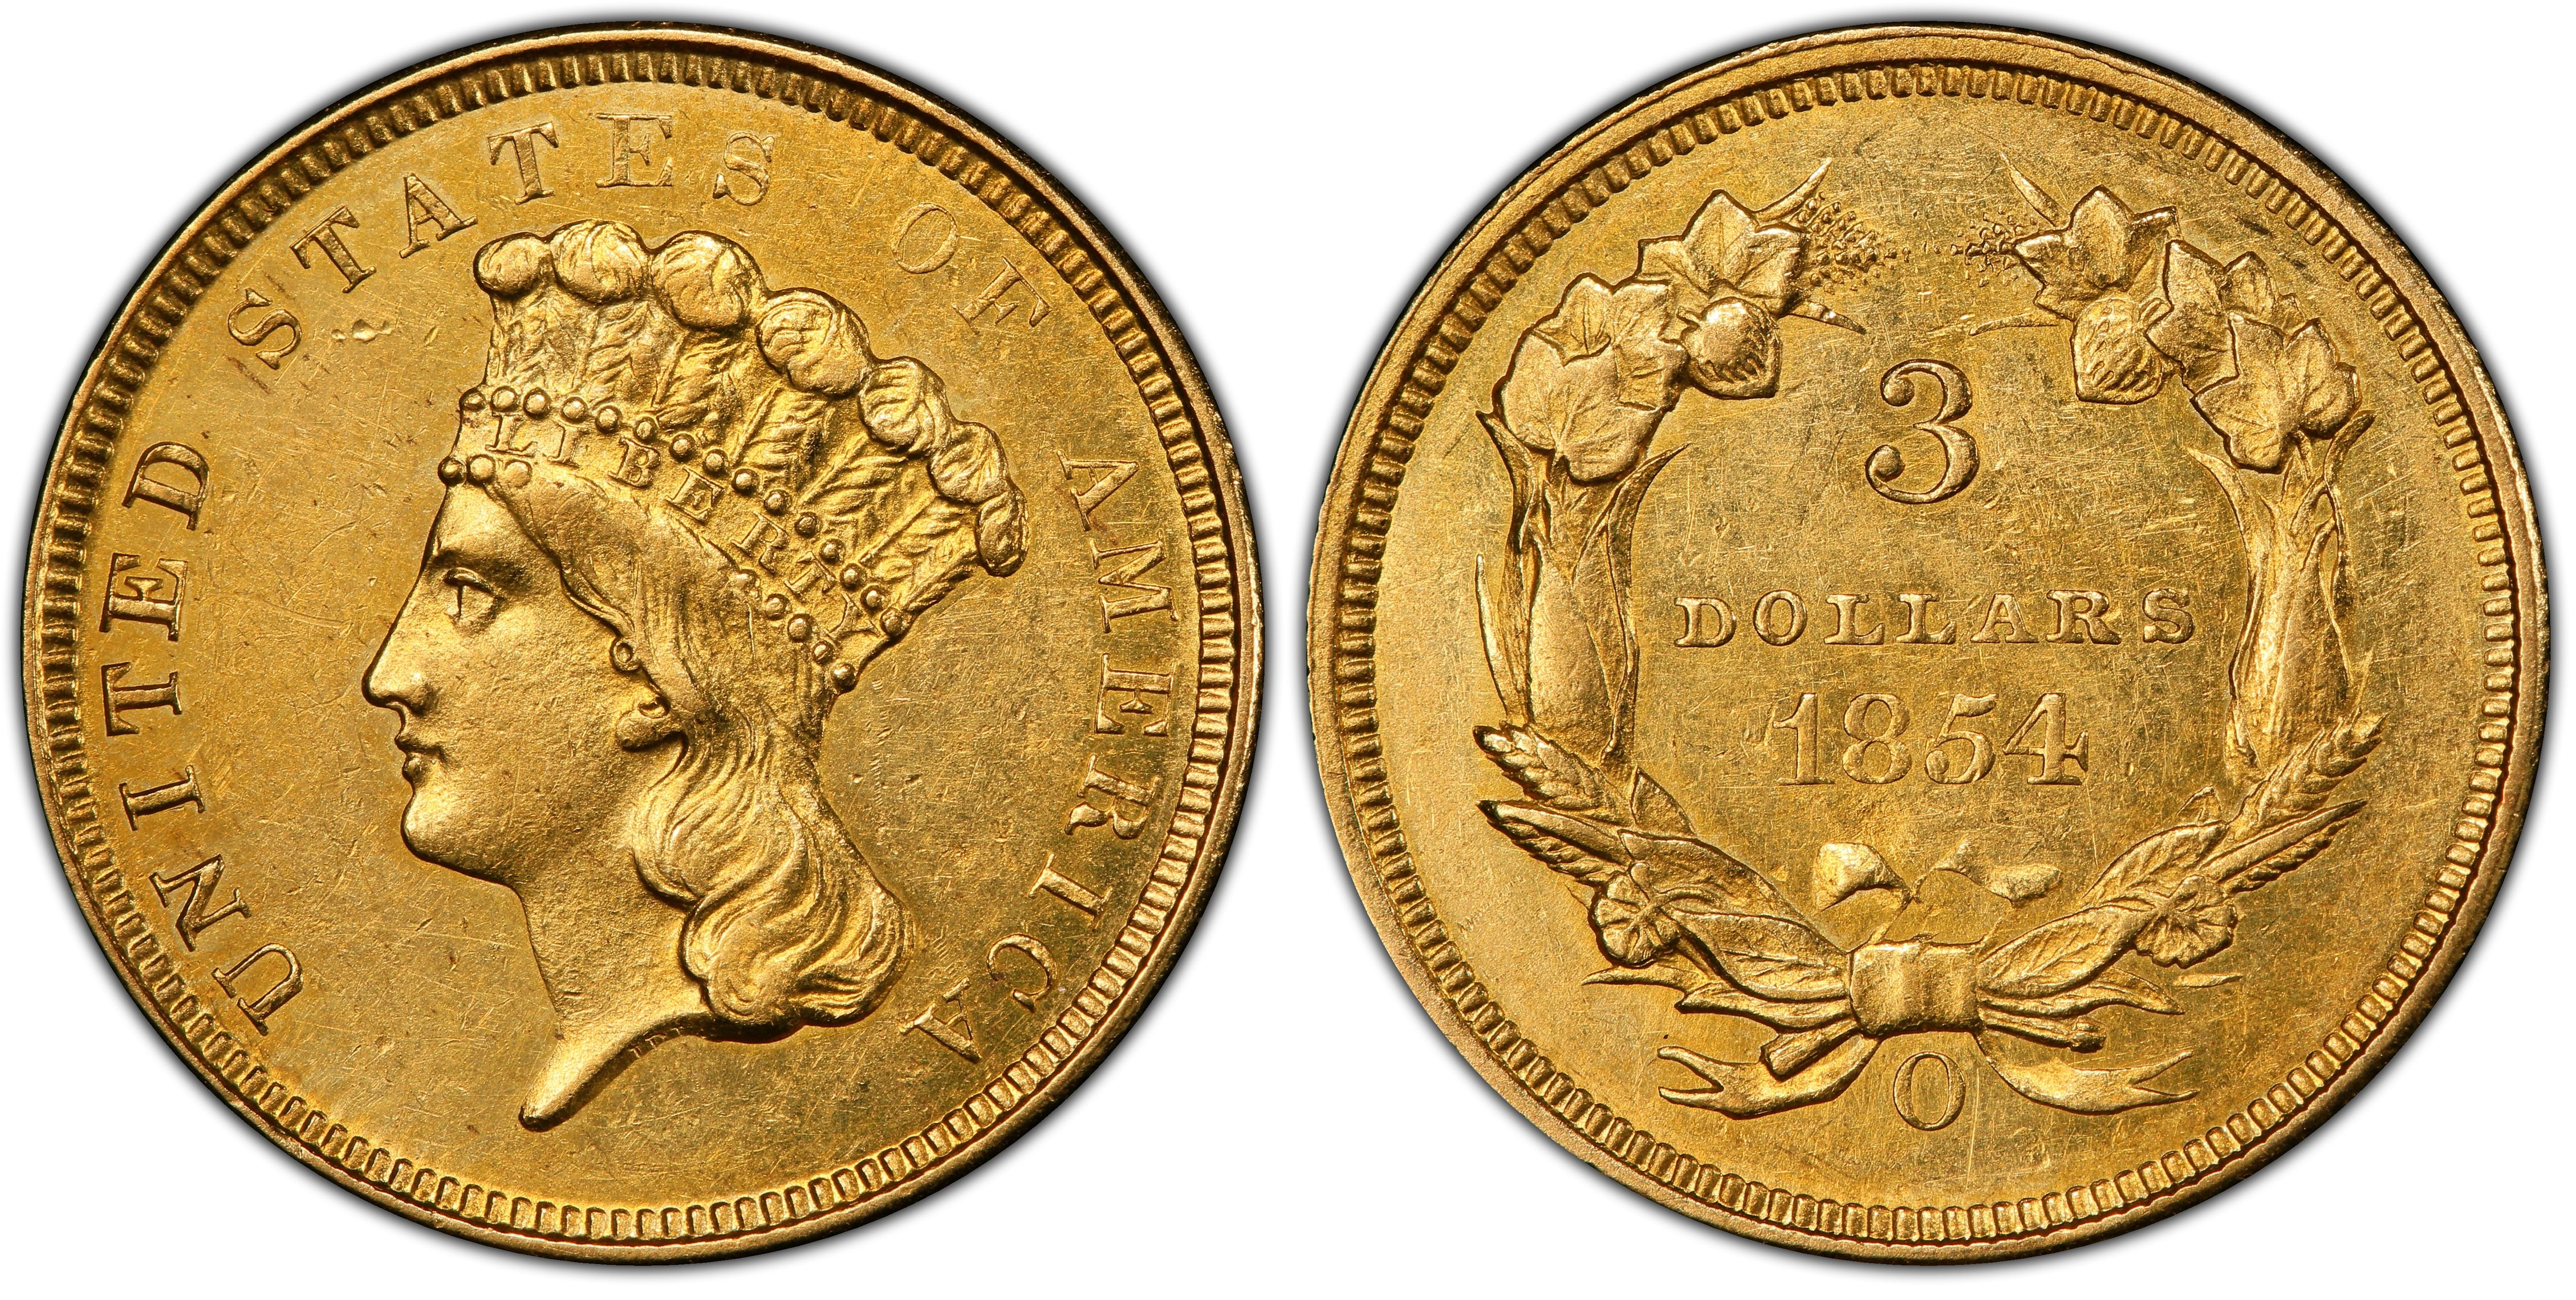 1854 Indian Princess Head Gold $3 Three Dollar Piece - Early Gold Coins  Coin Value Prices, Photos & Info